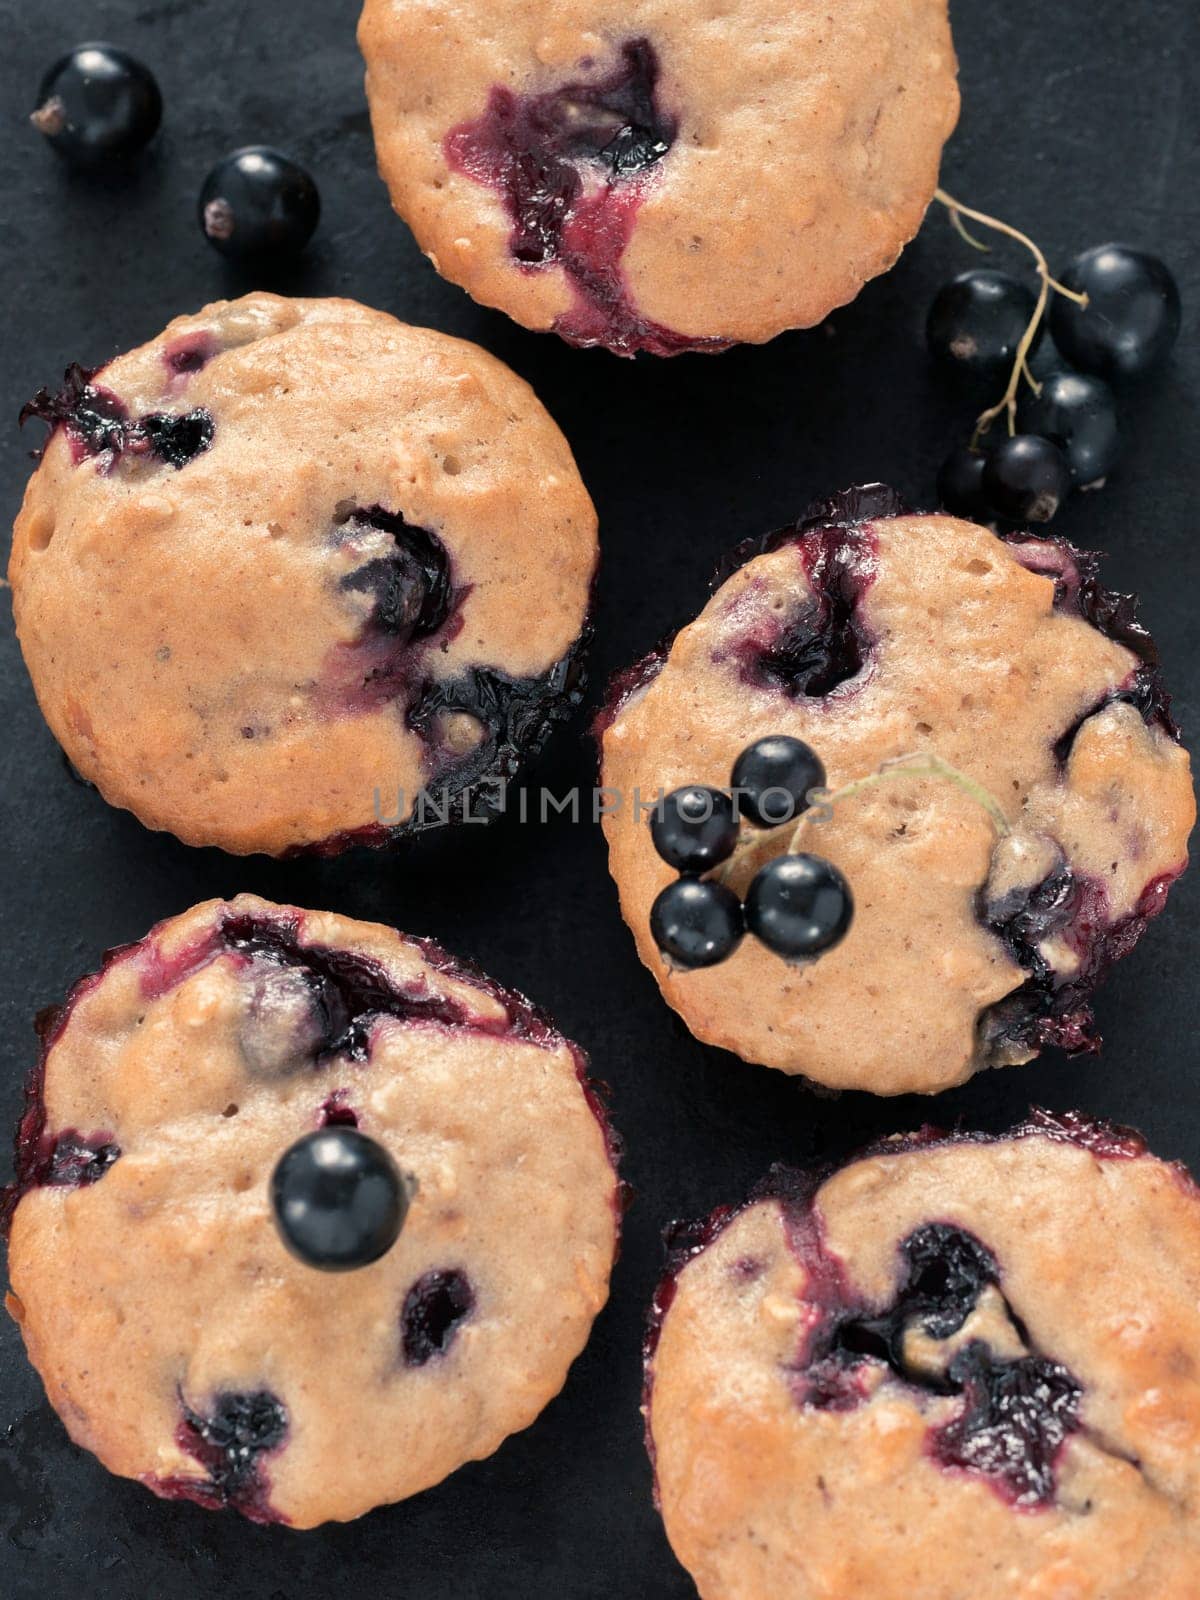 Muffins with black currant on dark background close up. Top view or flat lay